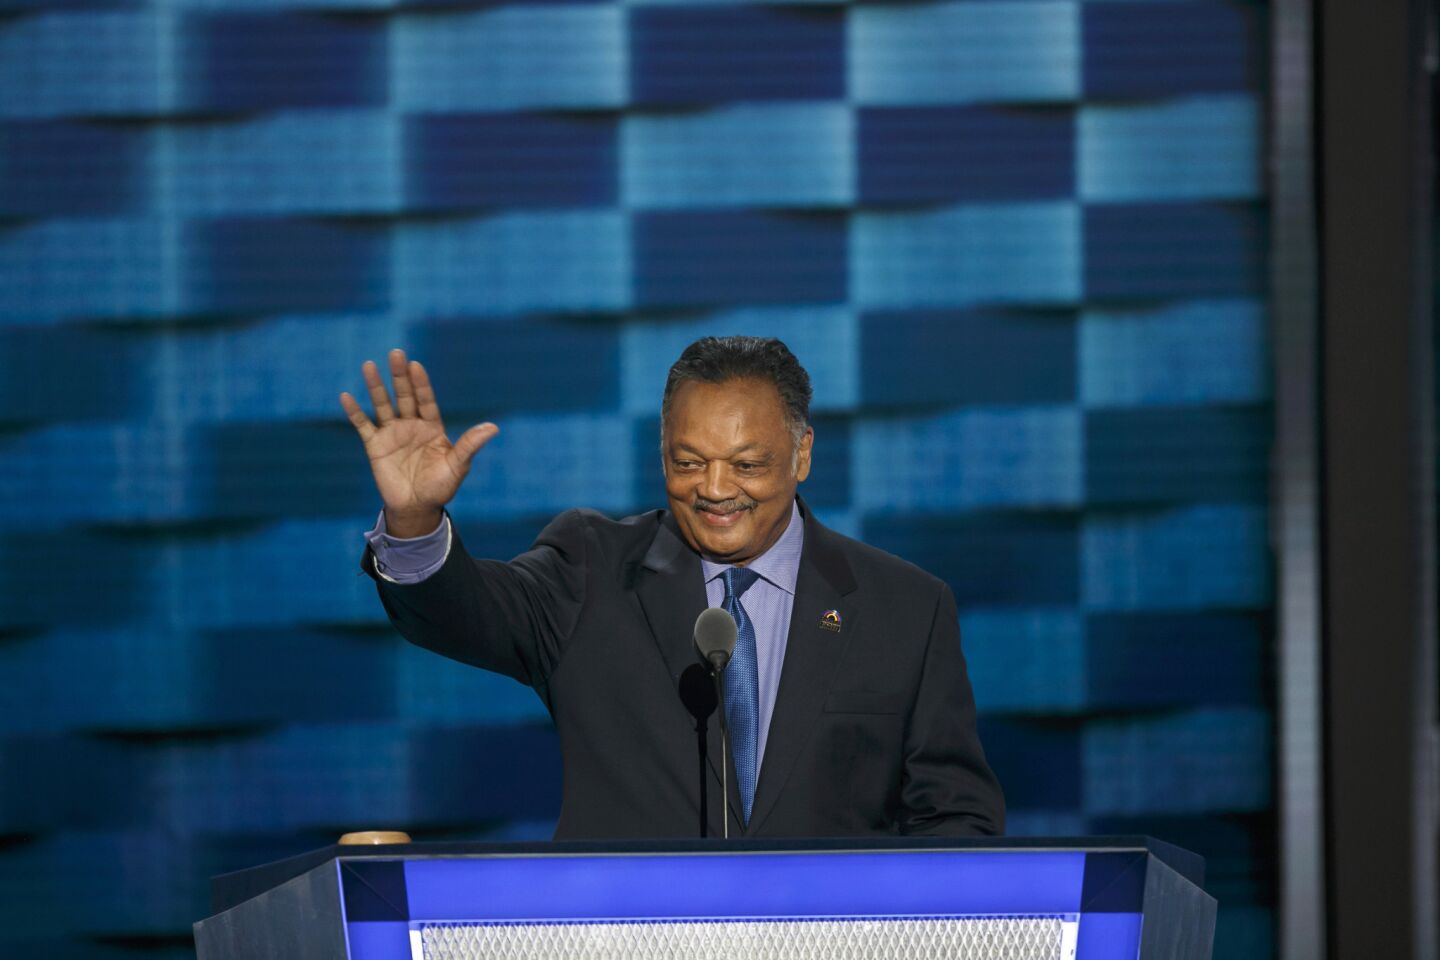 Civil Rights Leader Reverend Jesse Jackson at the 2016 Democratic National Convention in Philadelphia.